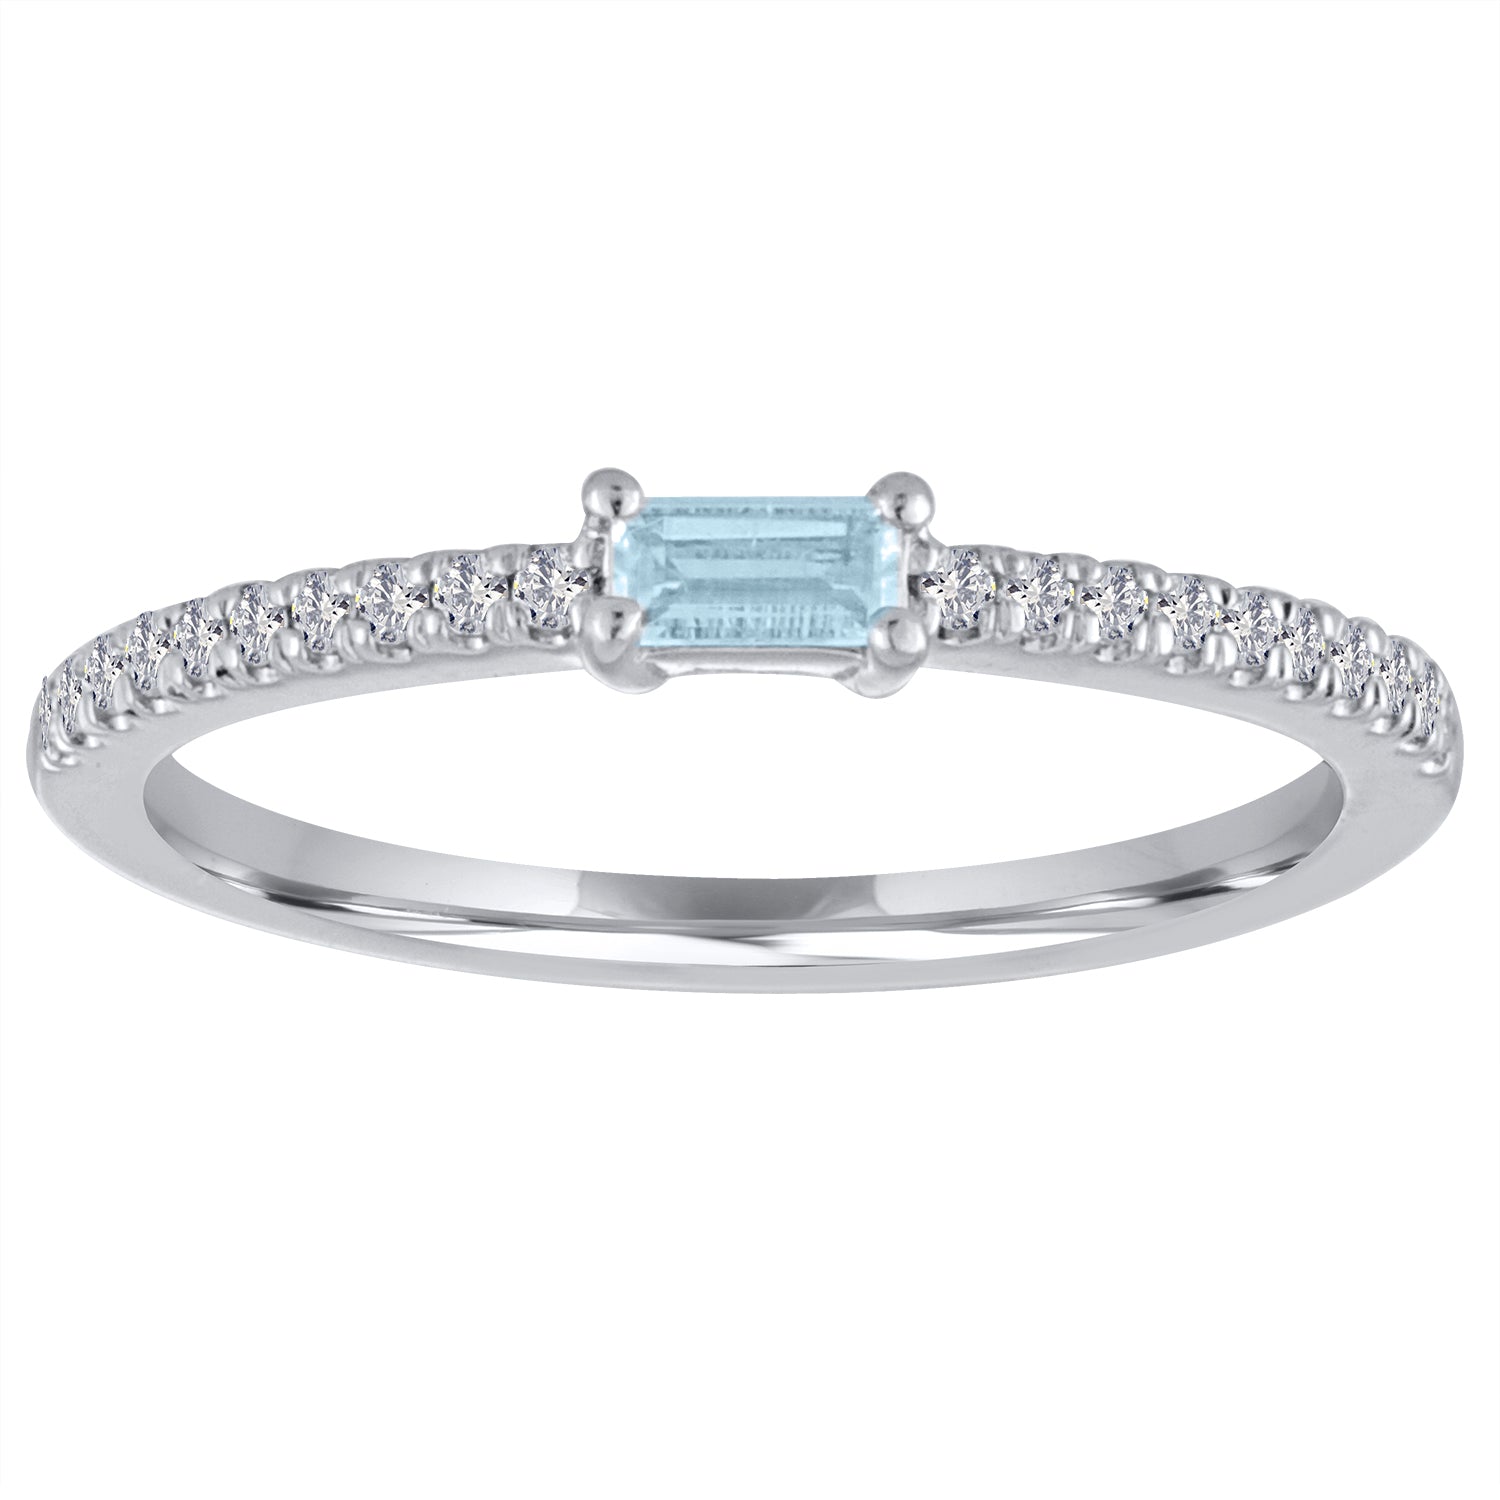 White gold skinny band with an aquamarine baguette in the center and round diamonds on the shank.